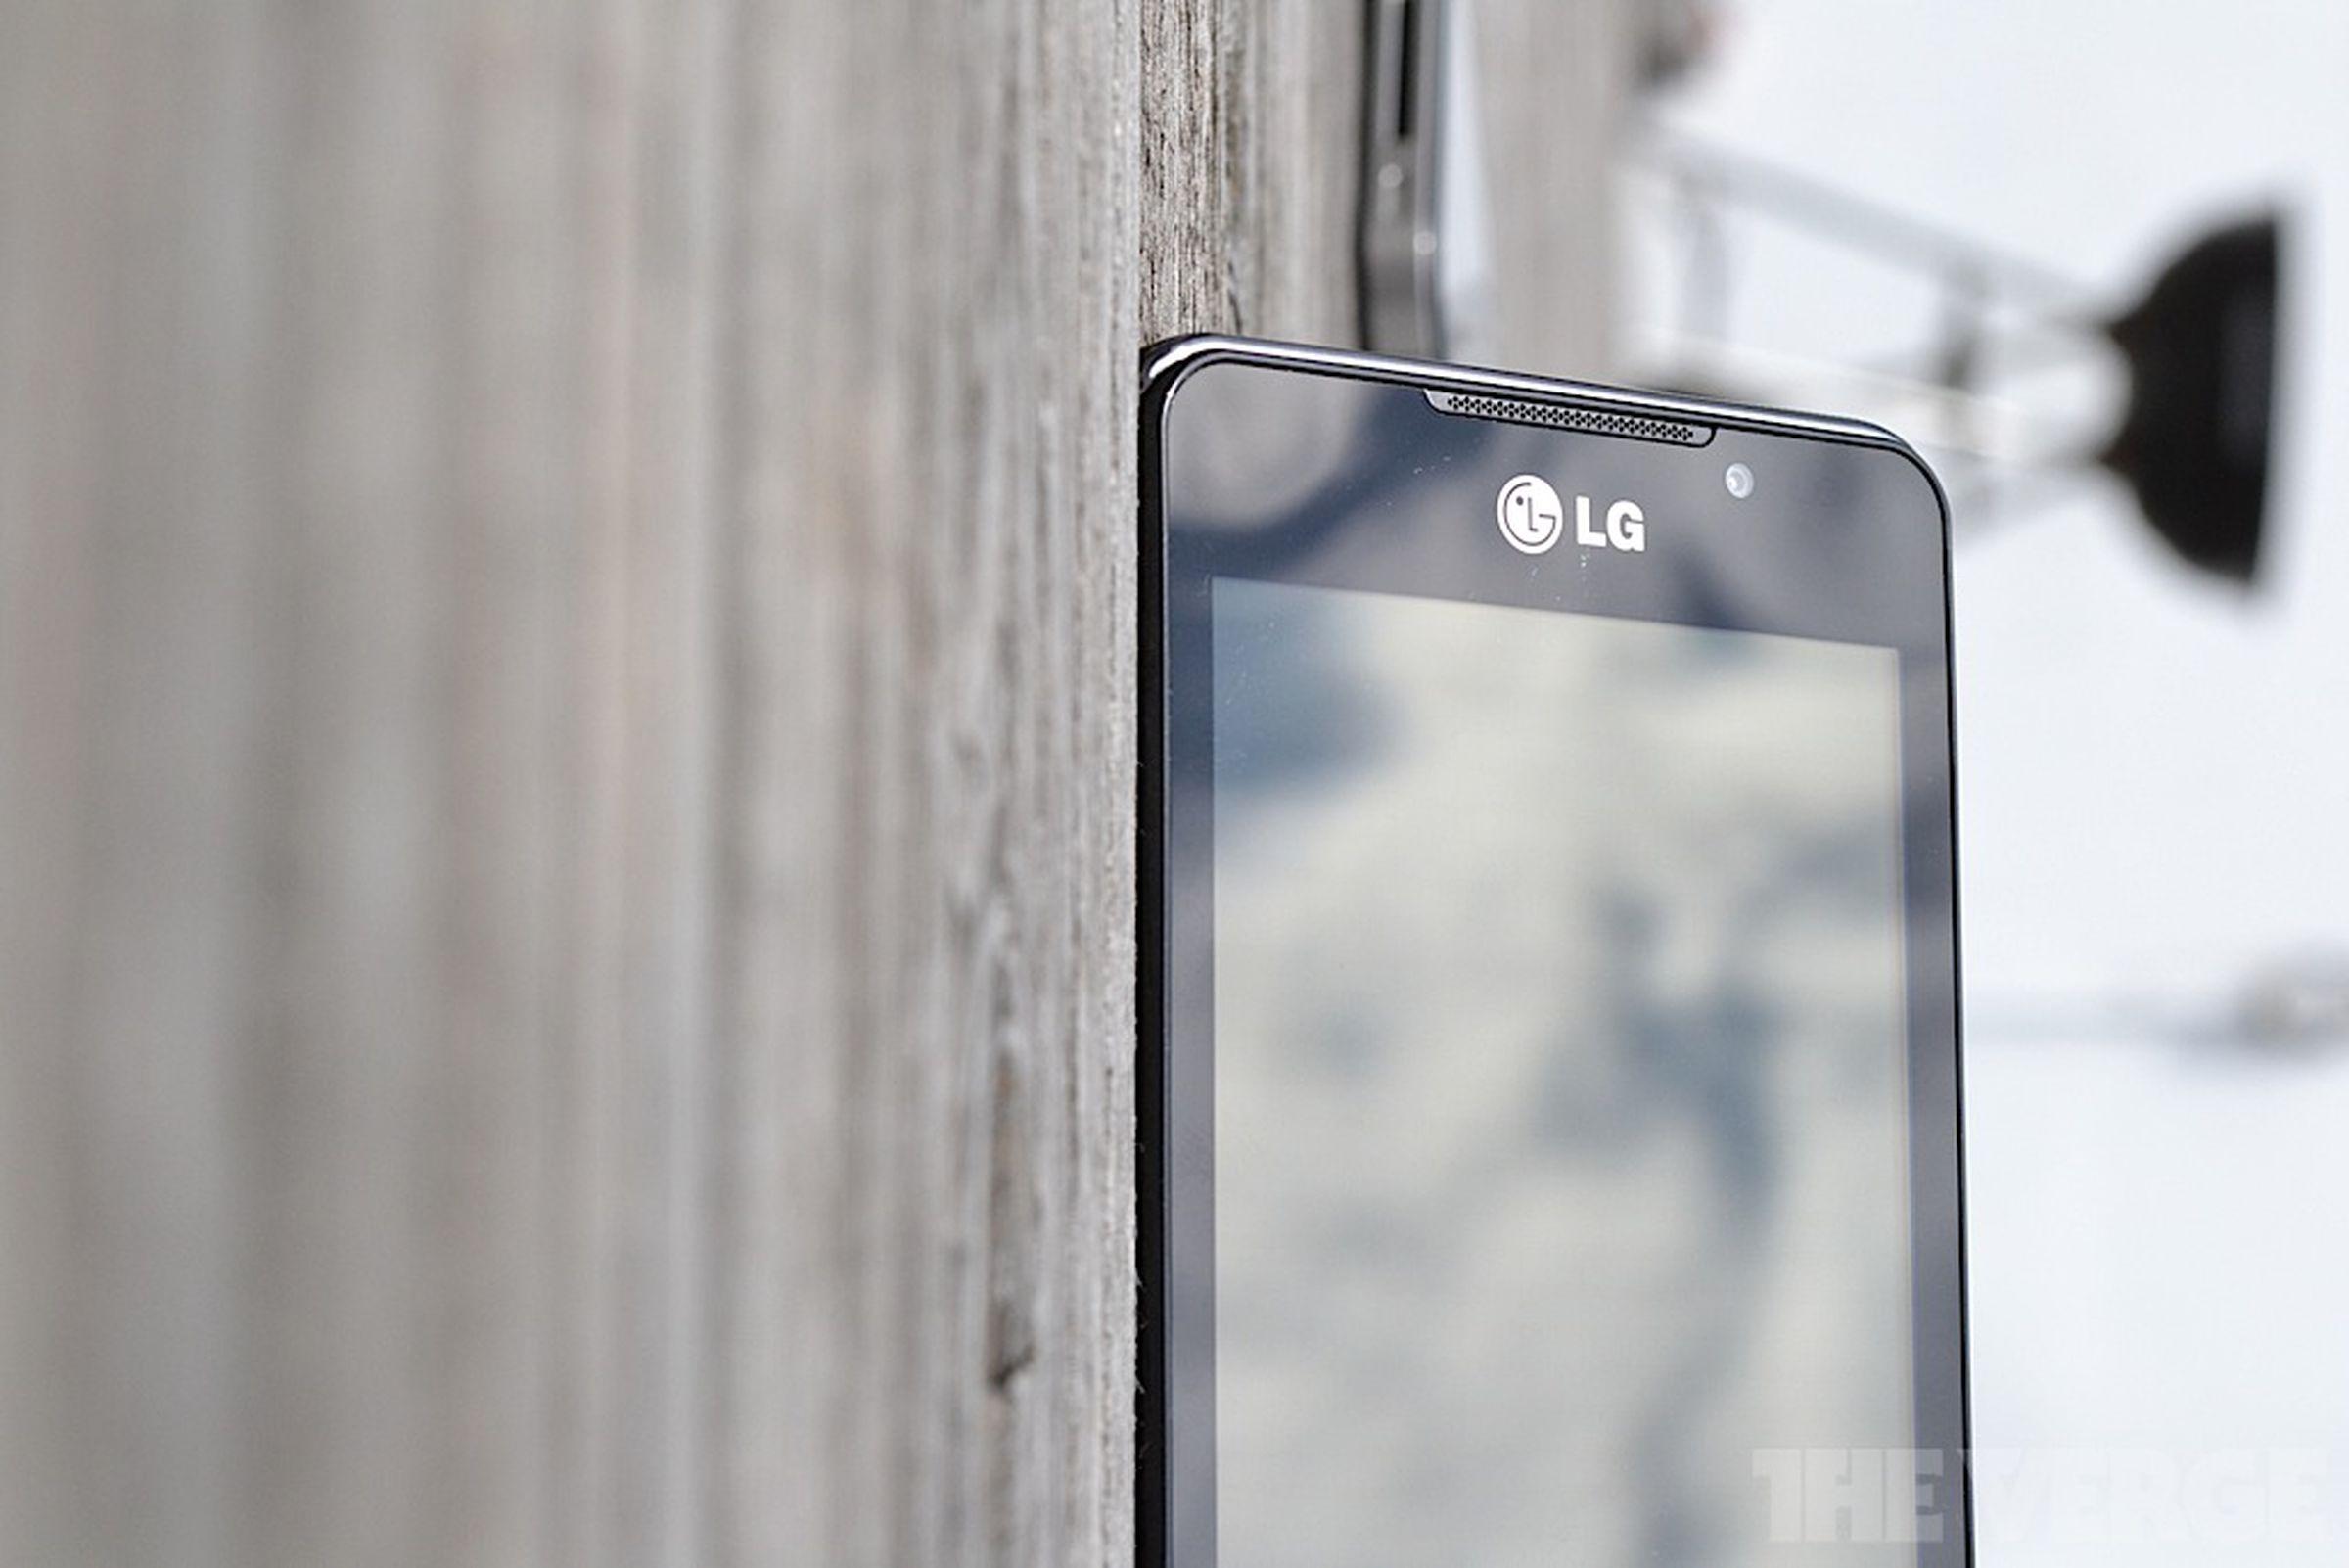 LG Optimus 3D Max hands-on pictures